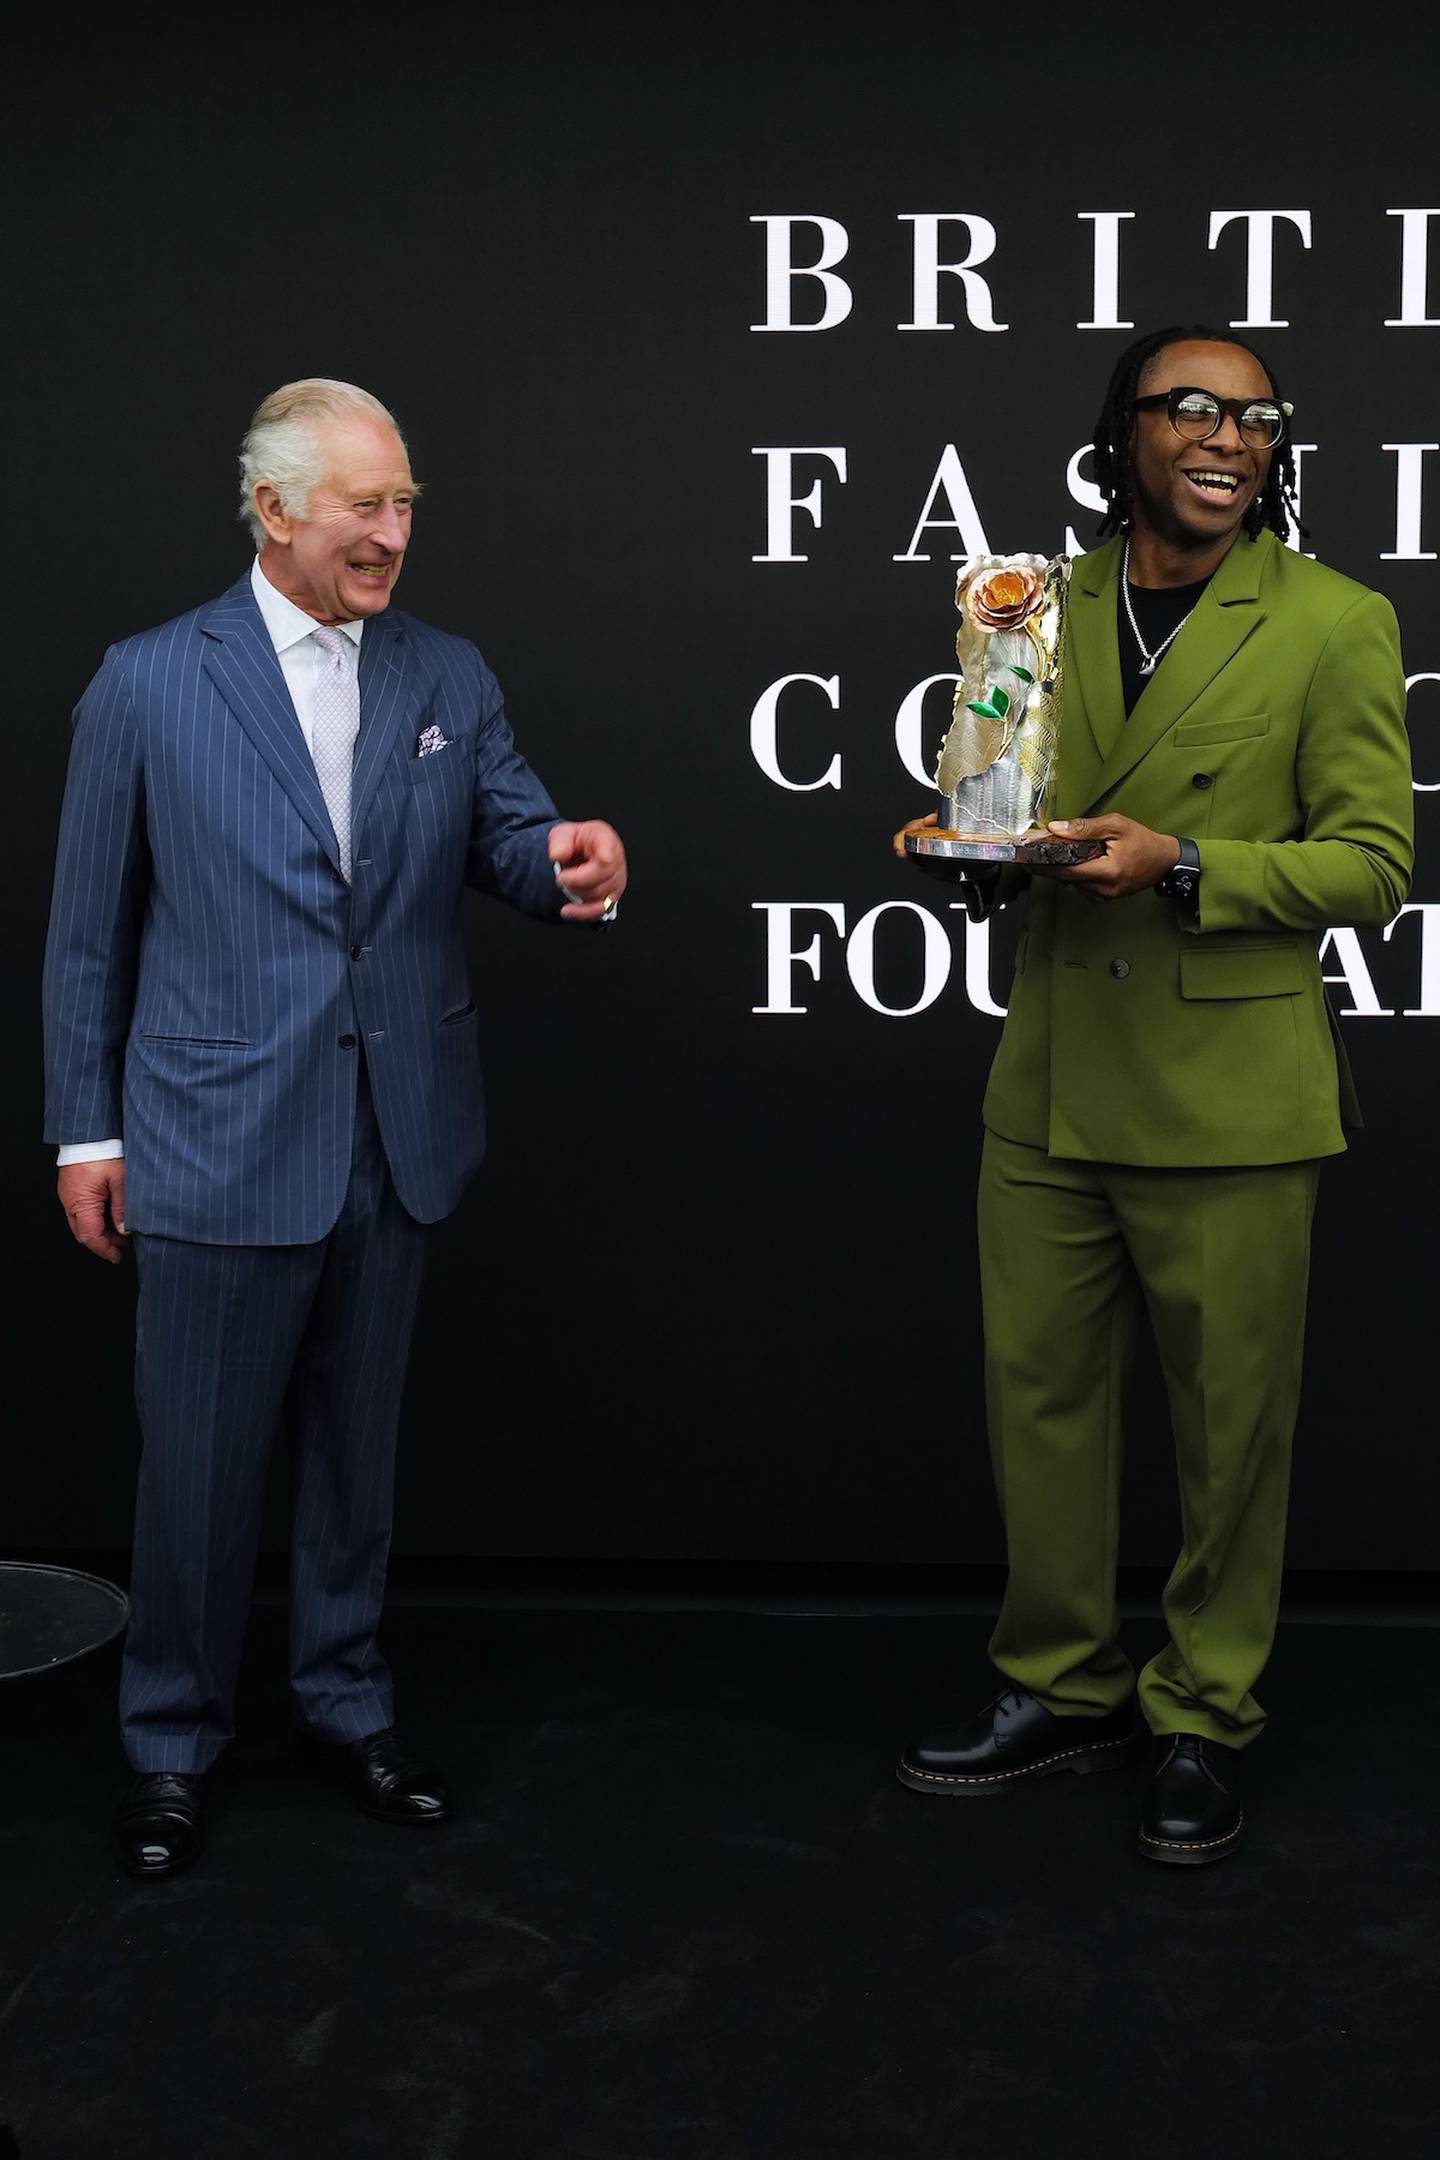 King Charles III and Labrum London attend the British Fashion Council Foundation Impact Day 2023 at 180 The Strand on May 18, 2023 in London, England. (Photo by Darren Gerrish/Getty Images for The BFC)